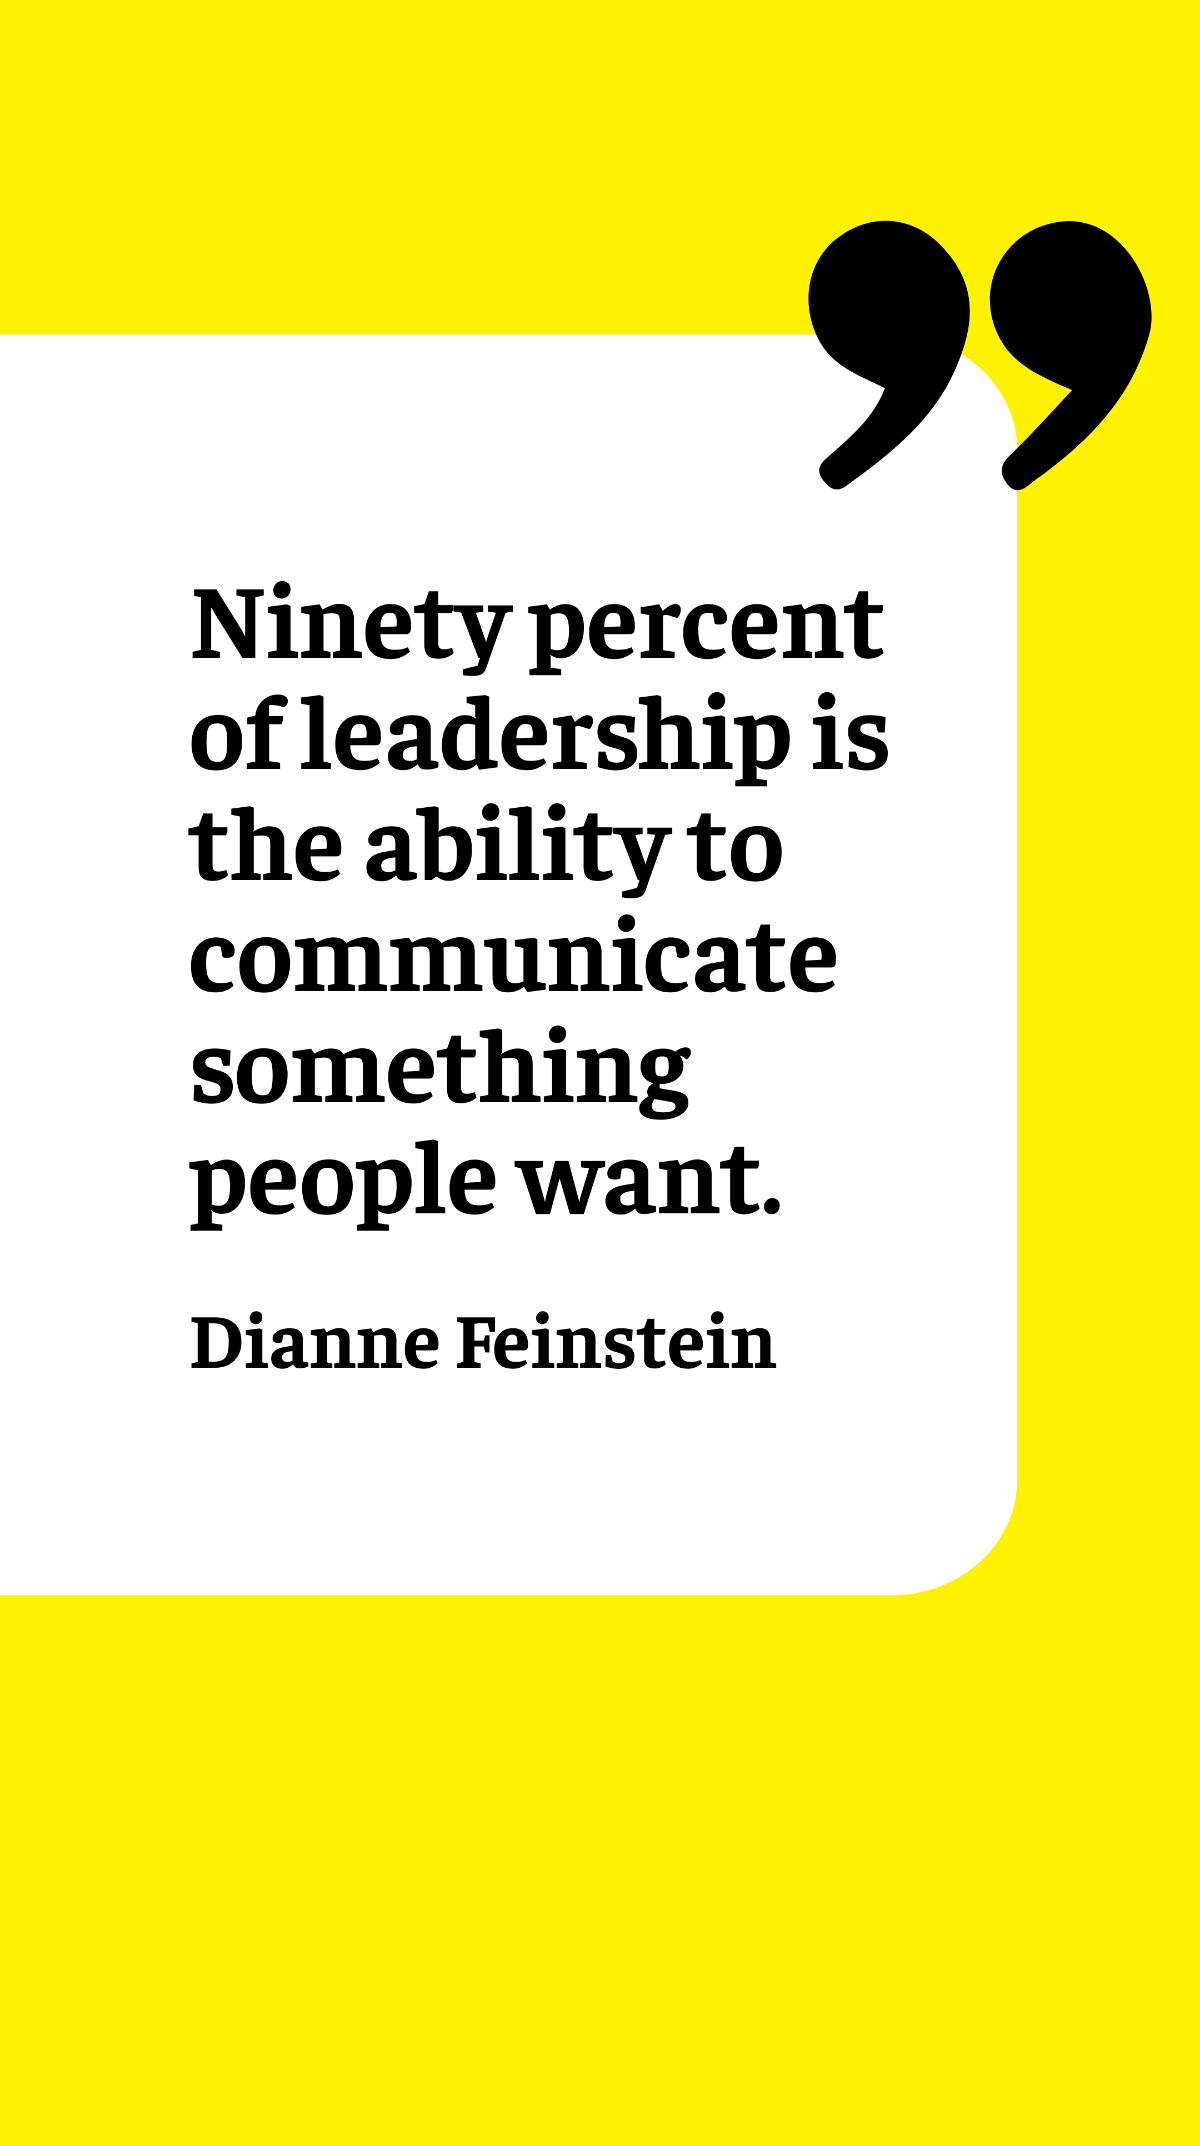 Dianne Feinstein - Ninety percent of leadership is the ability to communicate something people want. Template